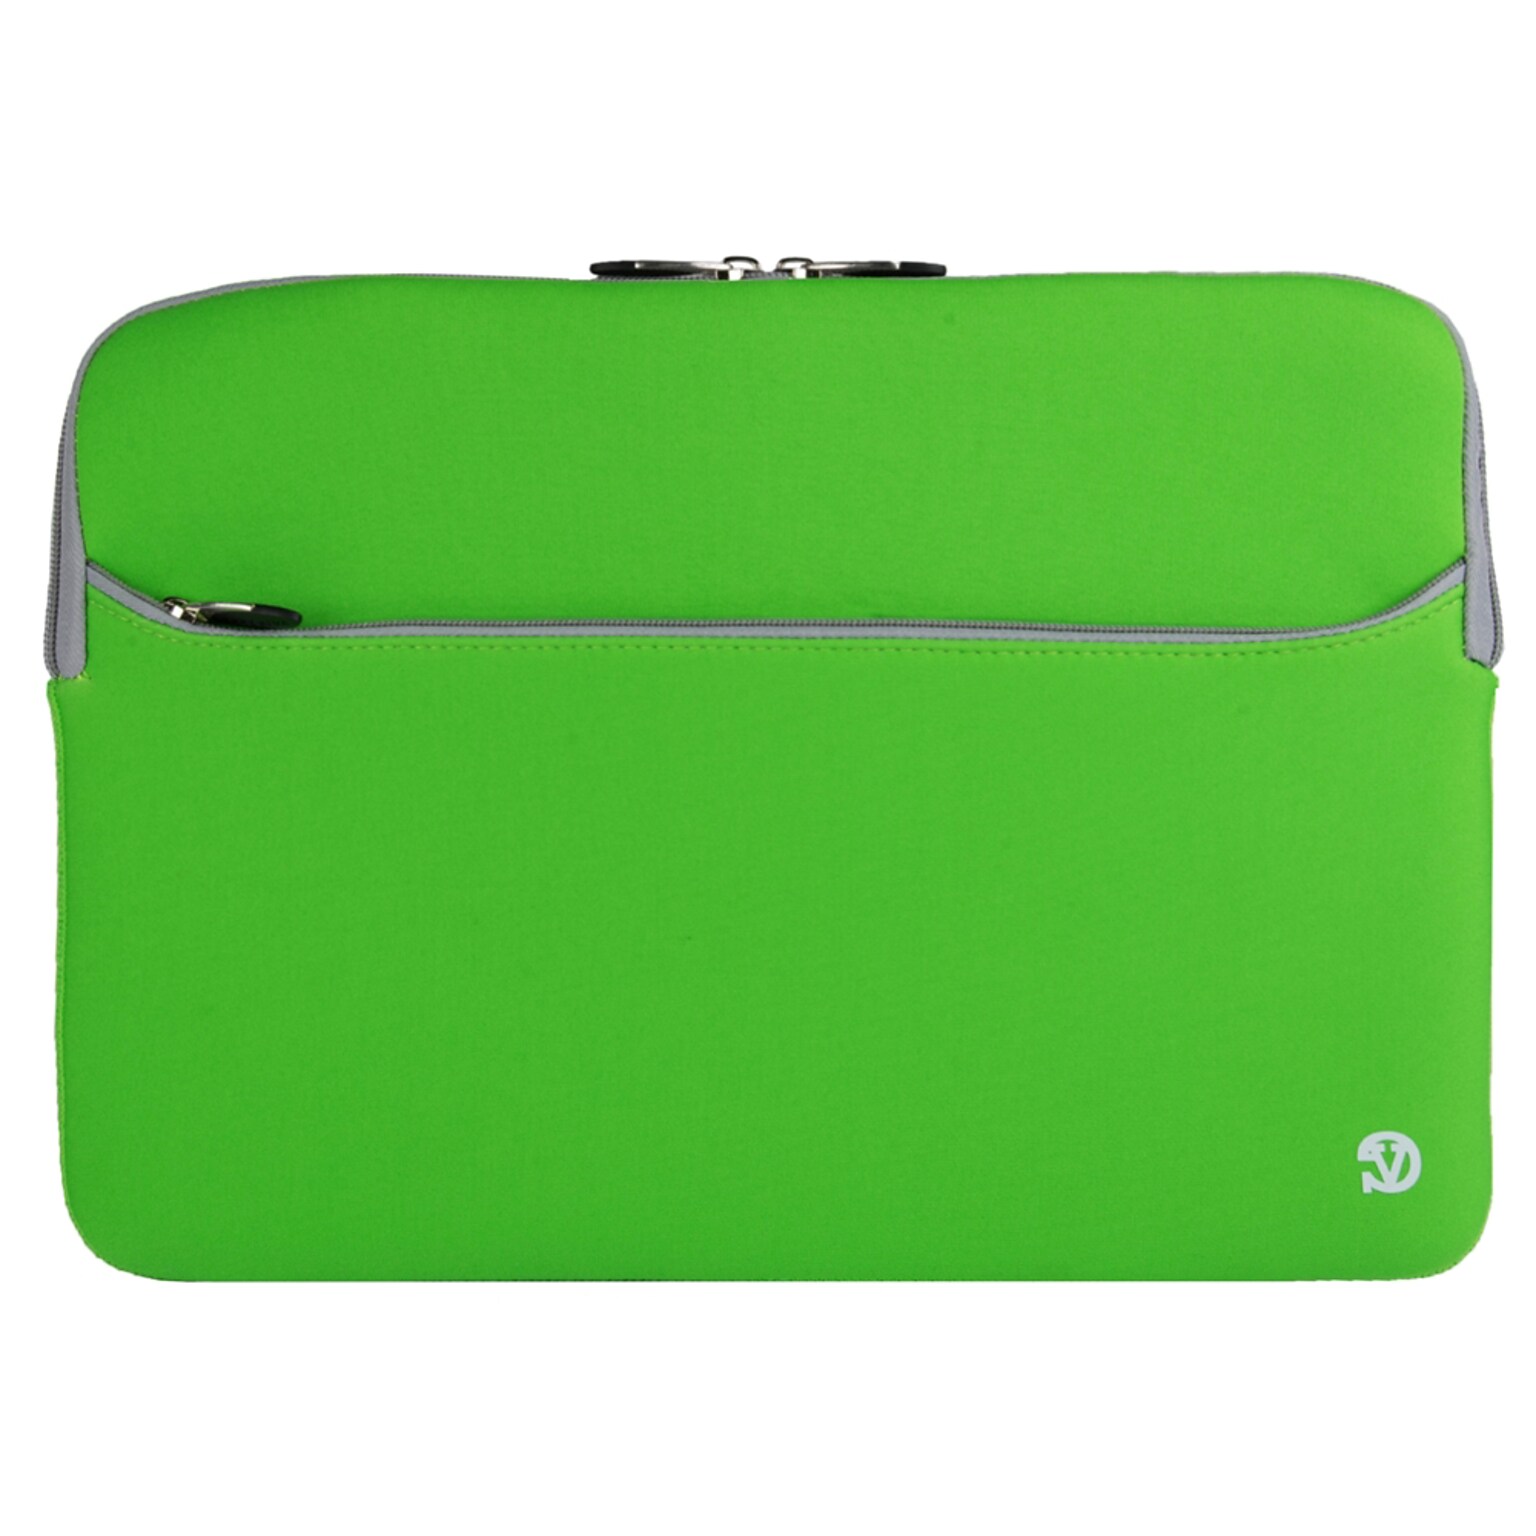 Vangoddy Neoprene Laptop Carrying Sleeve Fits up to 13 Laptops (Green)